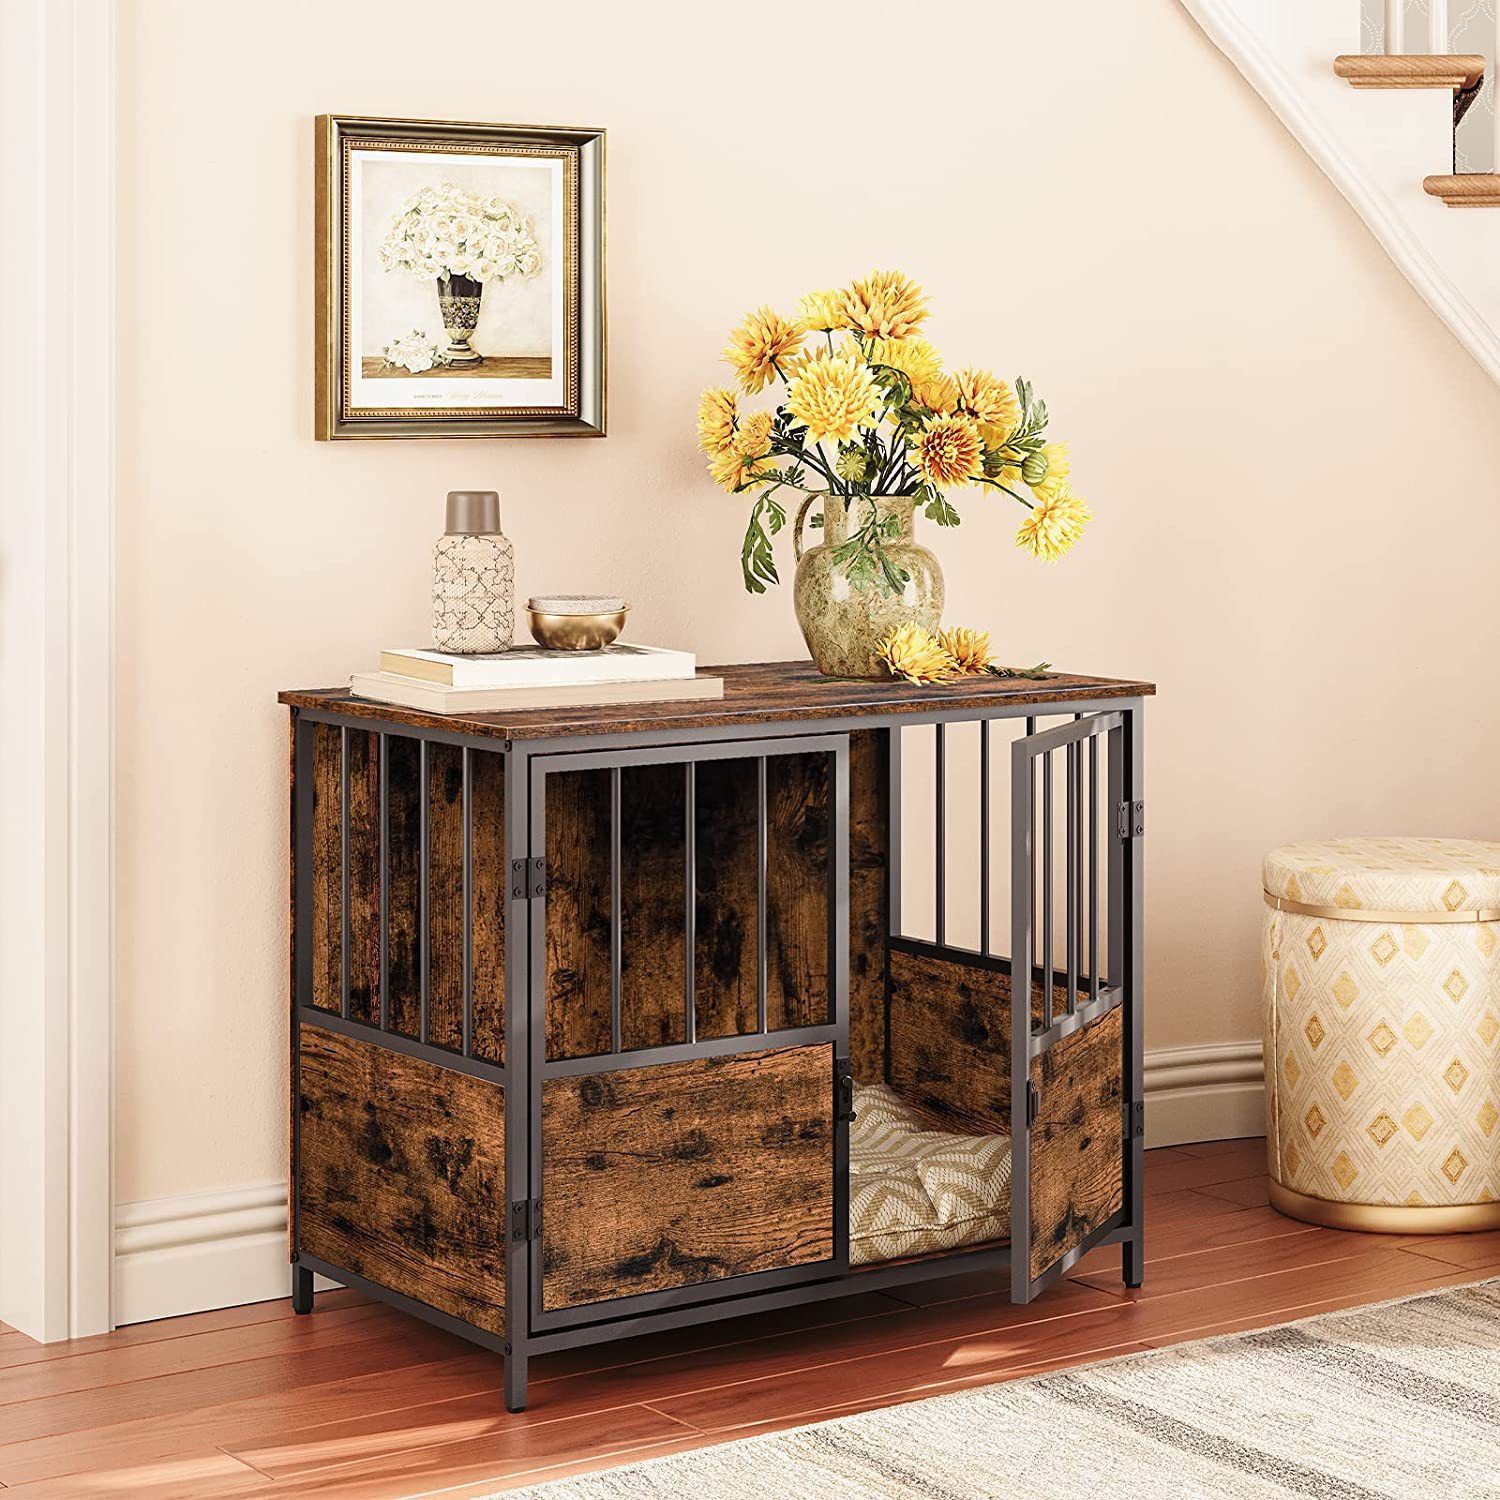 Wooden Dog Crate, Small Dog Kennel bedside Table, Indoor Pet House with Metal Mesh Door and Lock, Retro Style 